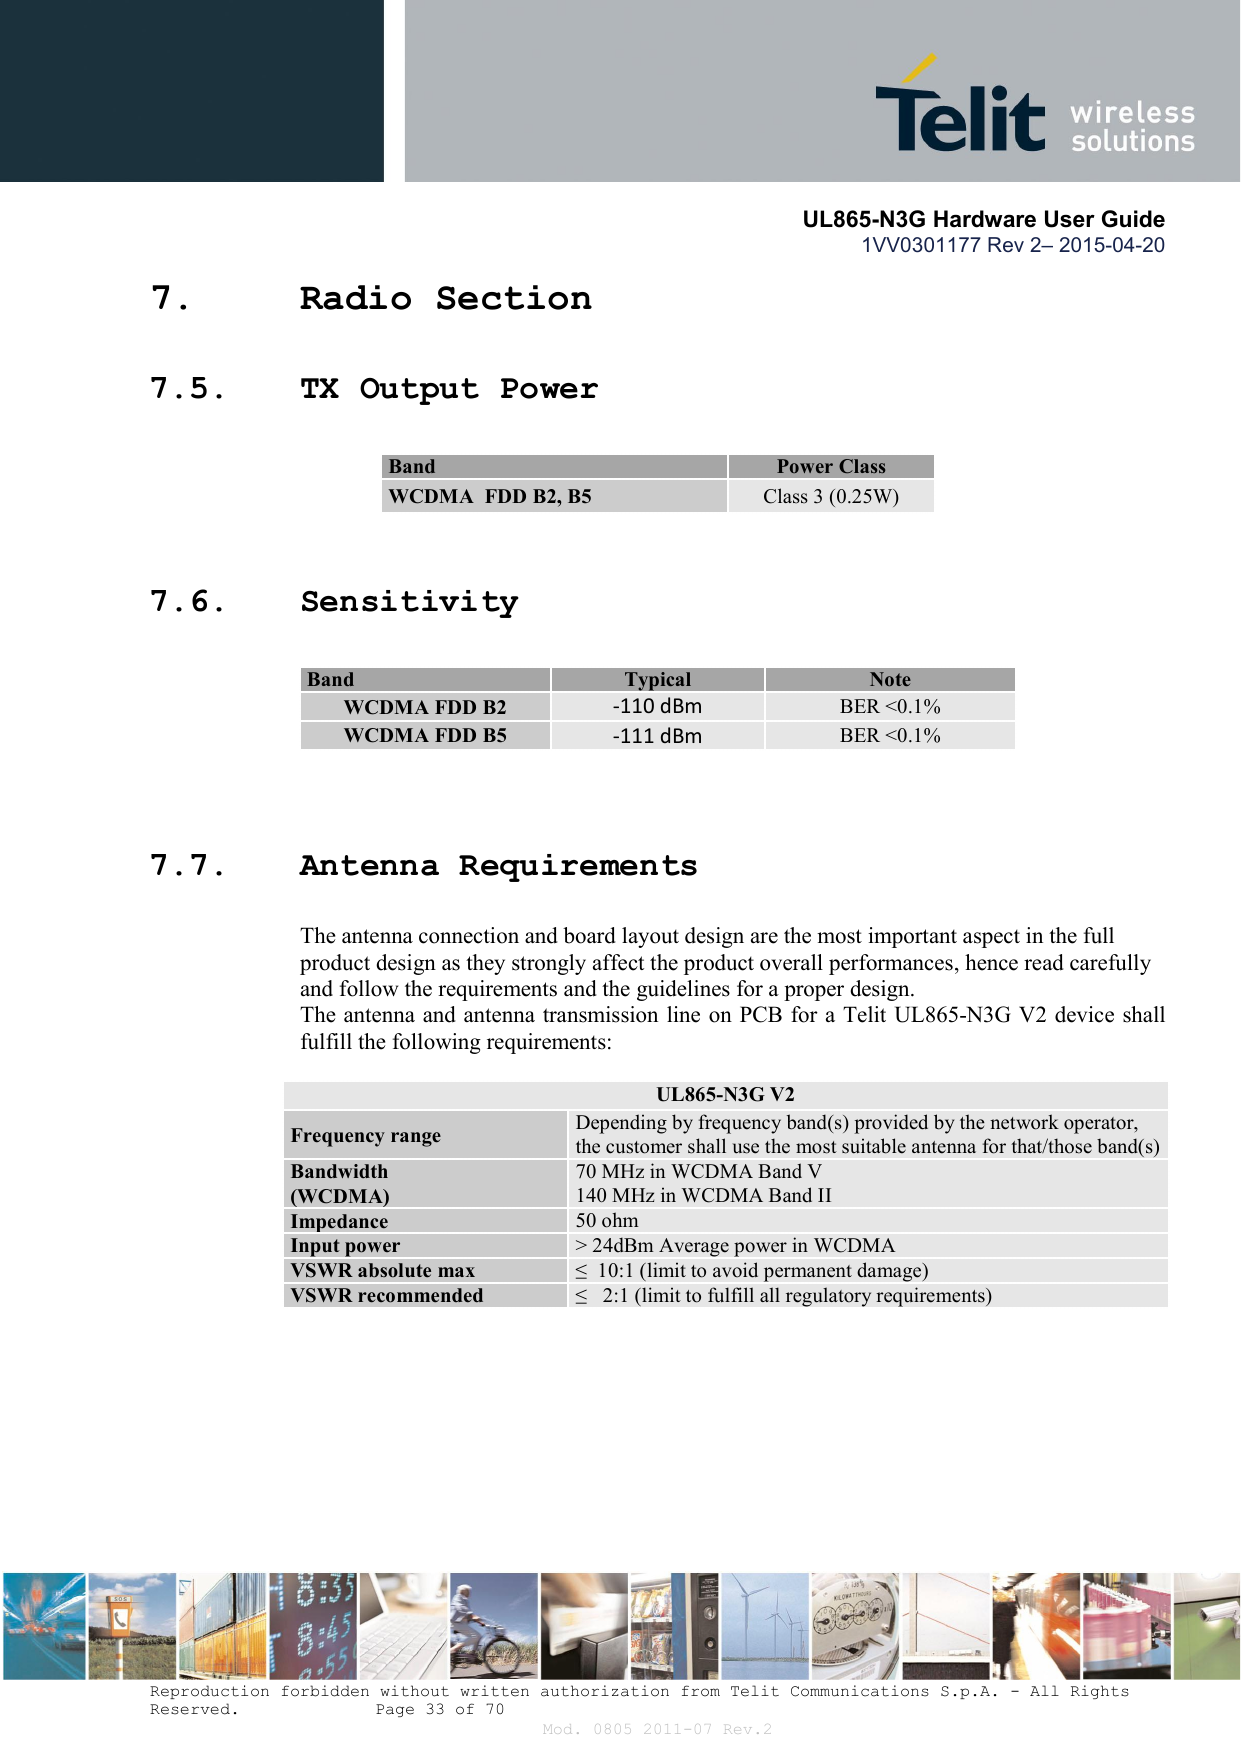       UL865-N3G Hardware User Guide 1VV0301177 Rev 2– 2015-04-20  Reproduction forbidden without written authorization from Telit Communications S.p.A. - All Rights Reserved.    Page 33 of 70 Mod. 0805 2011-07 Rev.2 7. Radio Section 7.5. TX Output Power 7.6. Sensitivity       7.7. Antenna Requirements The antenna connection and board layout design are the most important aspect in the full product design as they strongly affect the product overall performances, hence read carefully and follow the requirements and the guidelines for a proper design. The antenna and antenna transmission line on PCB for a Telit UL865-N3G V2 device shall fulfill the following requirements:   UL865-N3G V2 Frequency range  Depending by frequency band(s) provided by the network operator, the customer shall use the most suitable antenna for that/those band(s) Bandwidth  (WCDMA) 70 MHz in WCDMA Band V 140 MHz in WCDMA Band II Impedance  50 ohm Input power  &gt; 24dBm Average power in WCDMA VSWR absolute max  ≤  10:1 (limit to avoid permanent damage) VSWR recommended  ≤   2:1 (limit to fulfill all regulatory requirements)     Band  Power Class WCDMA  FDD B2, B5  Class 3 (0.25W) Band  Typical   Note WCDMA FDD B2 -110 dBm BER &lt;0.1% WCDMA FDD B5 -111 dBm BER &lt;0.1% 